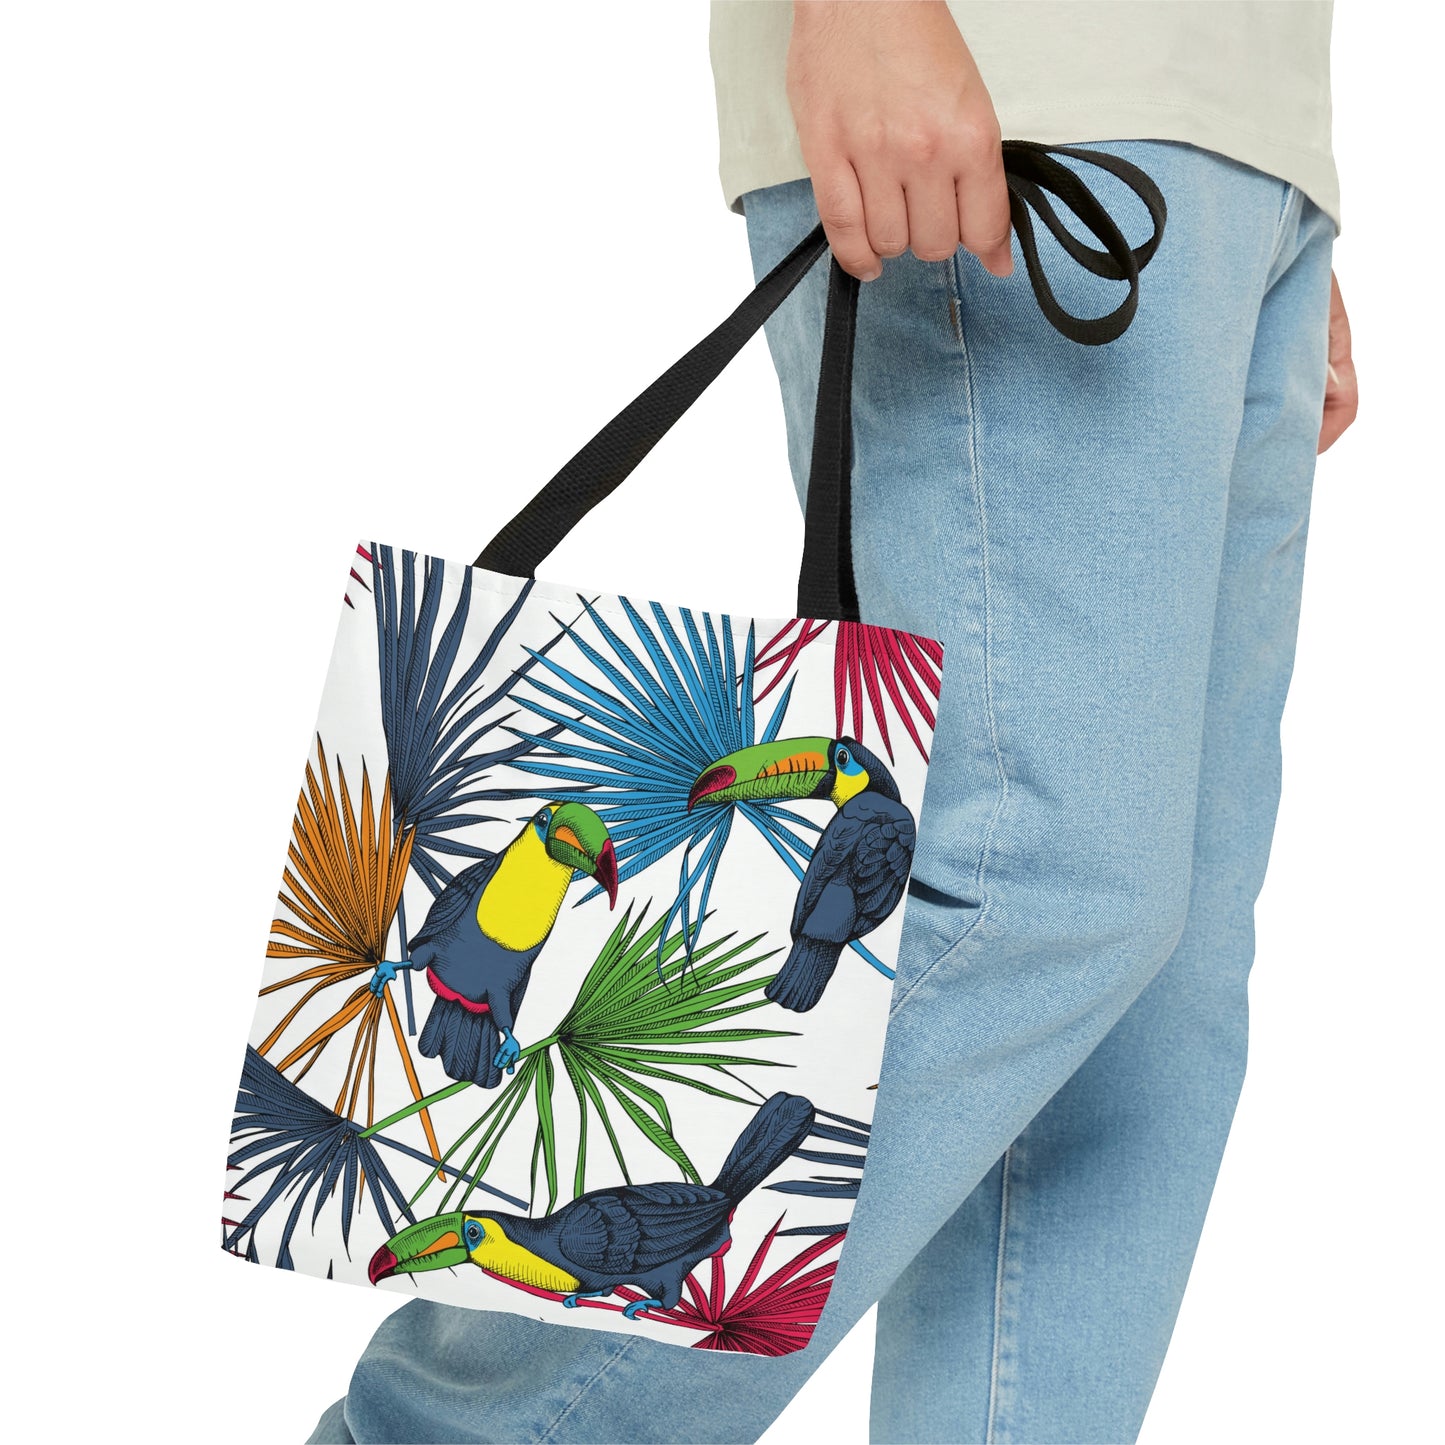 AOP Tote Bag "Tropical leaves, palm and Toucan birds"